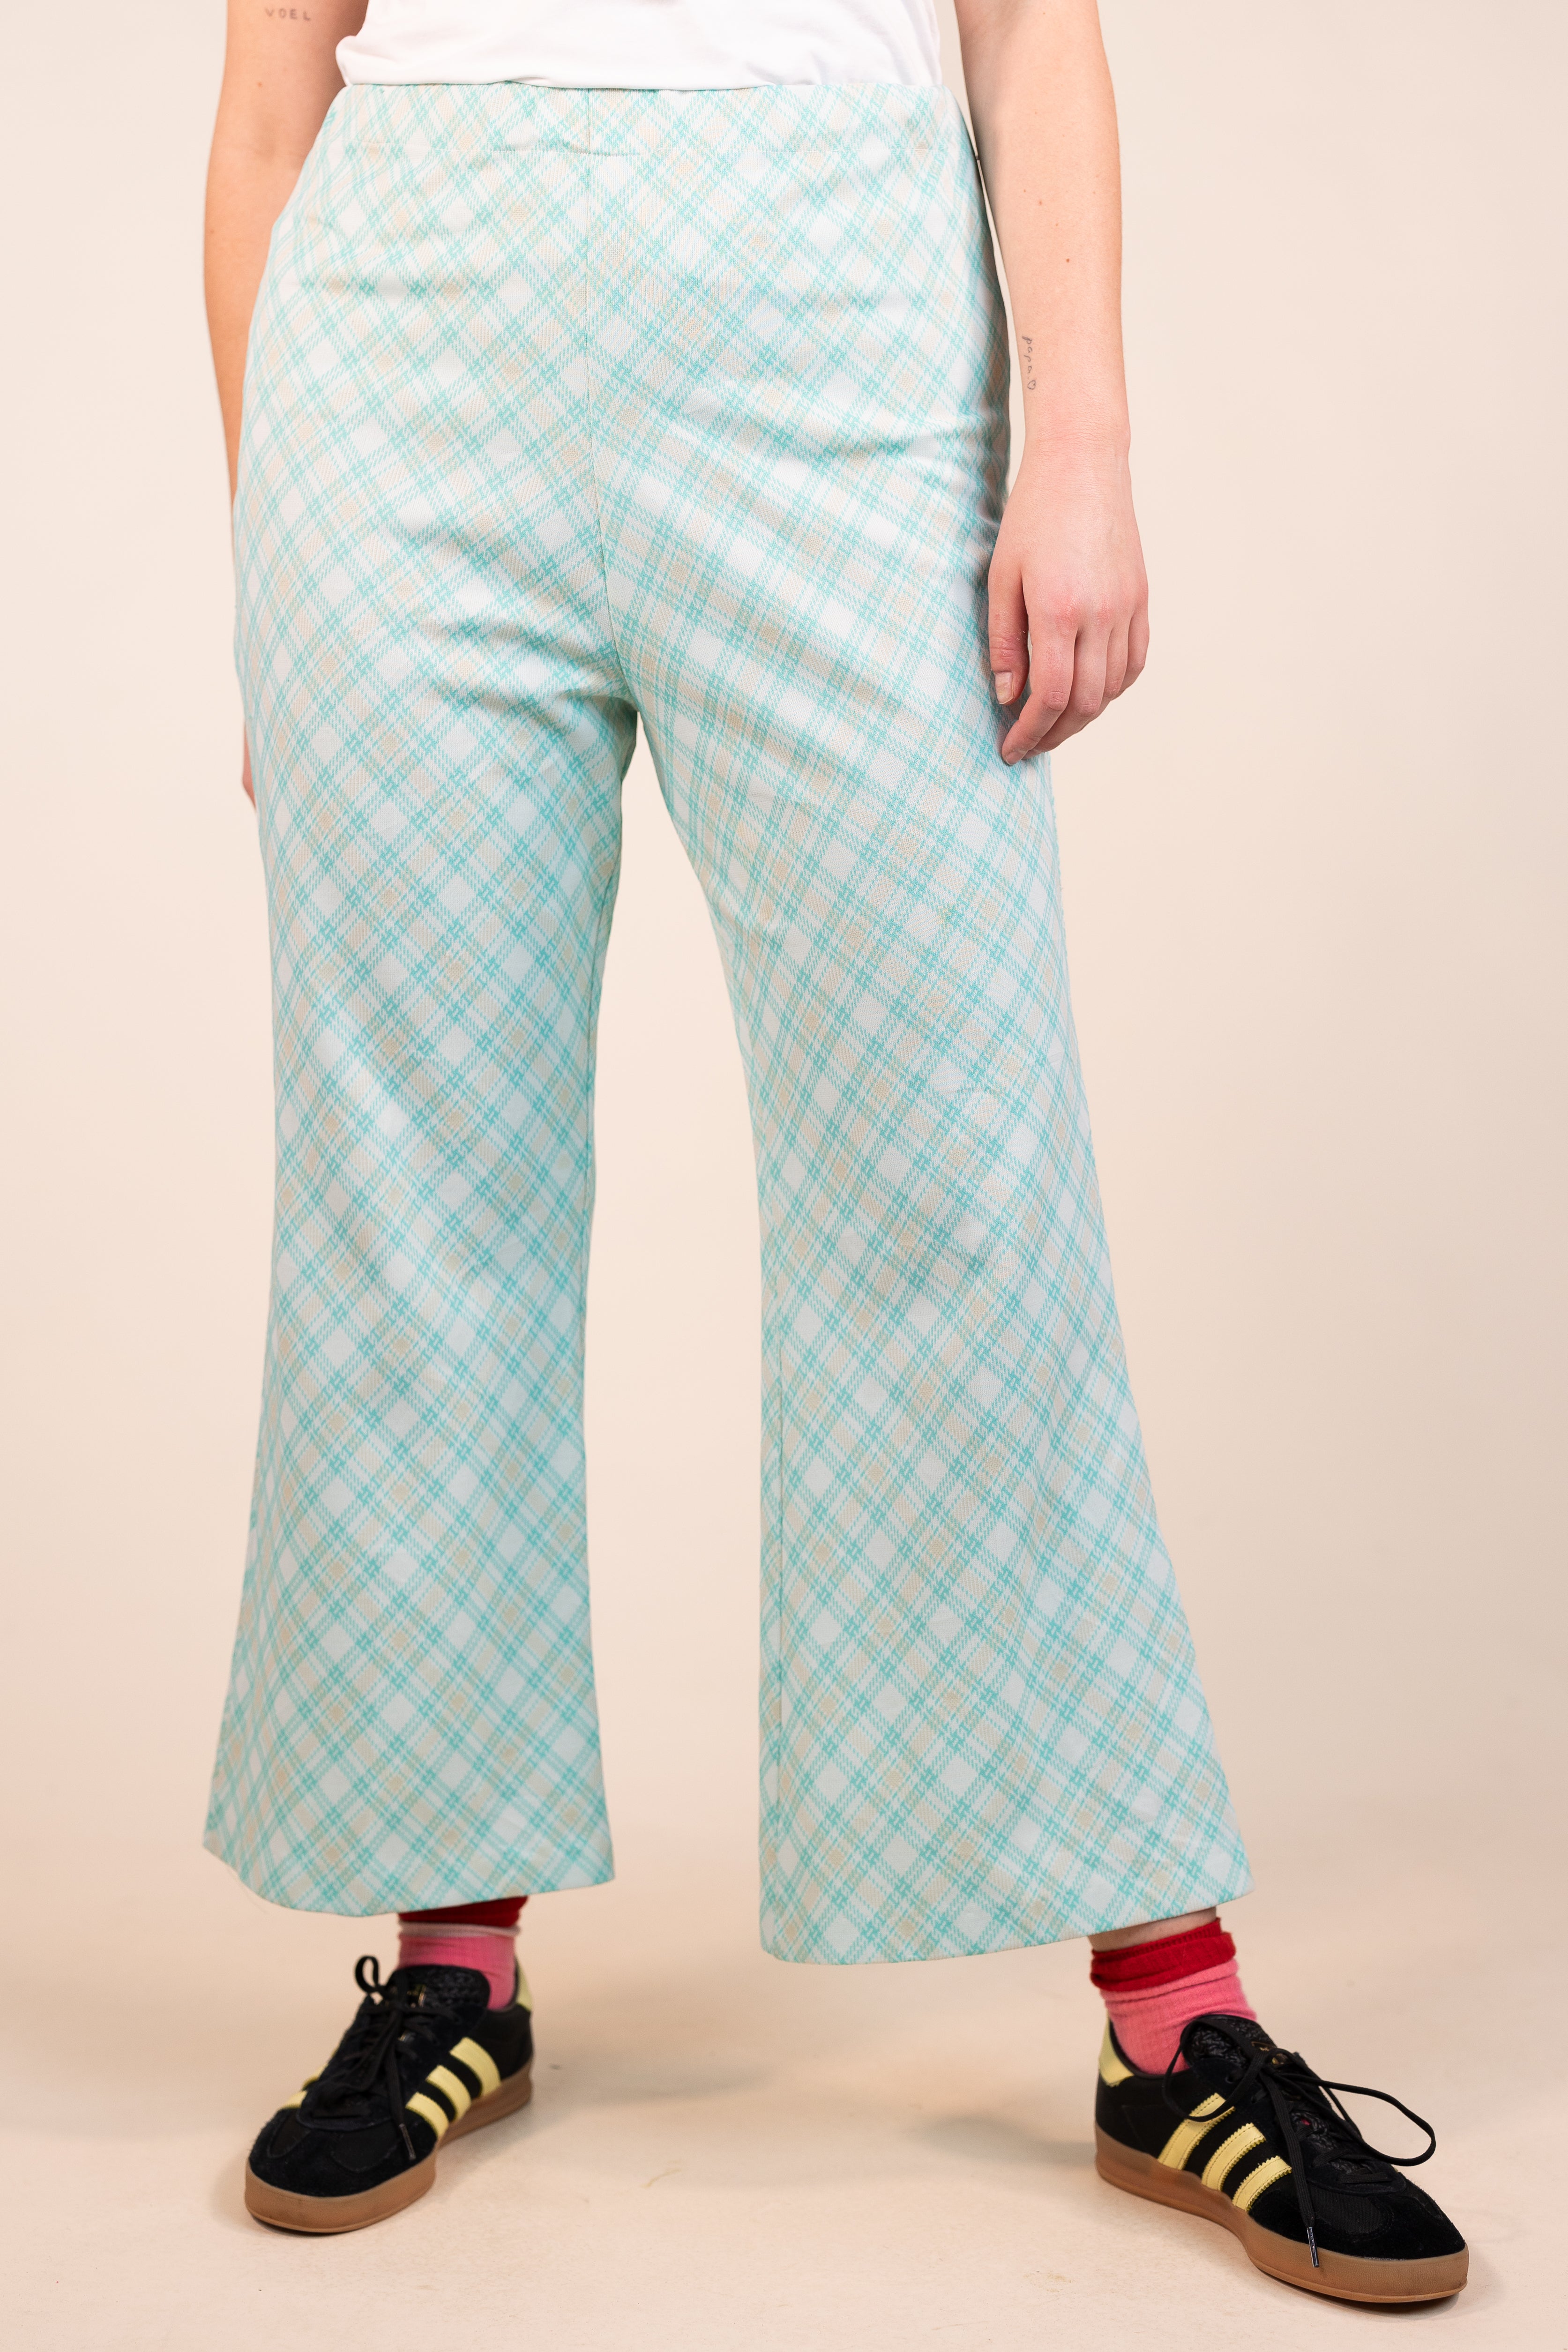 Elgar Shirts - Taking inspiration from the 1940s, we're very pleased to be  able to show you our first women's trousers. These vintage Landgirl style  trousers come with a detachable bib top